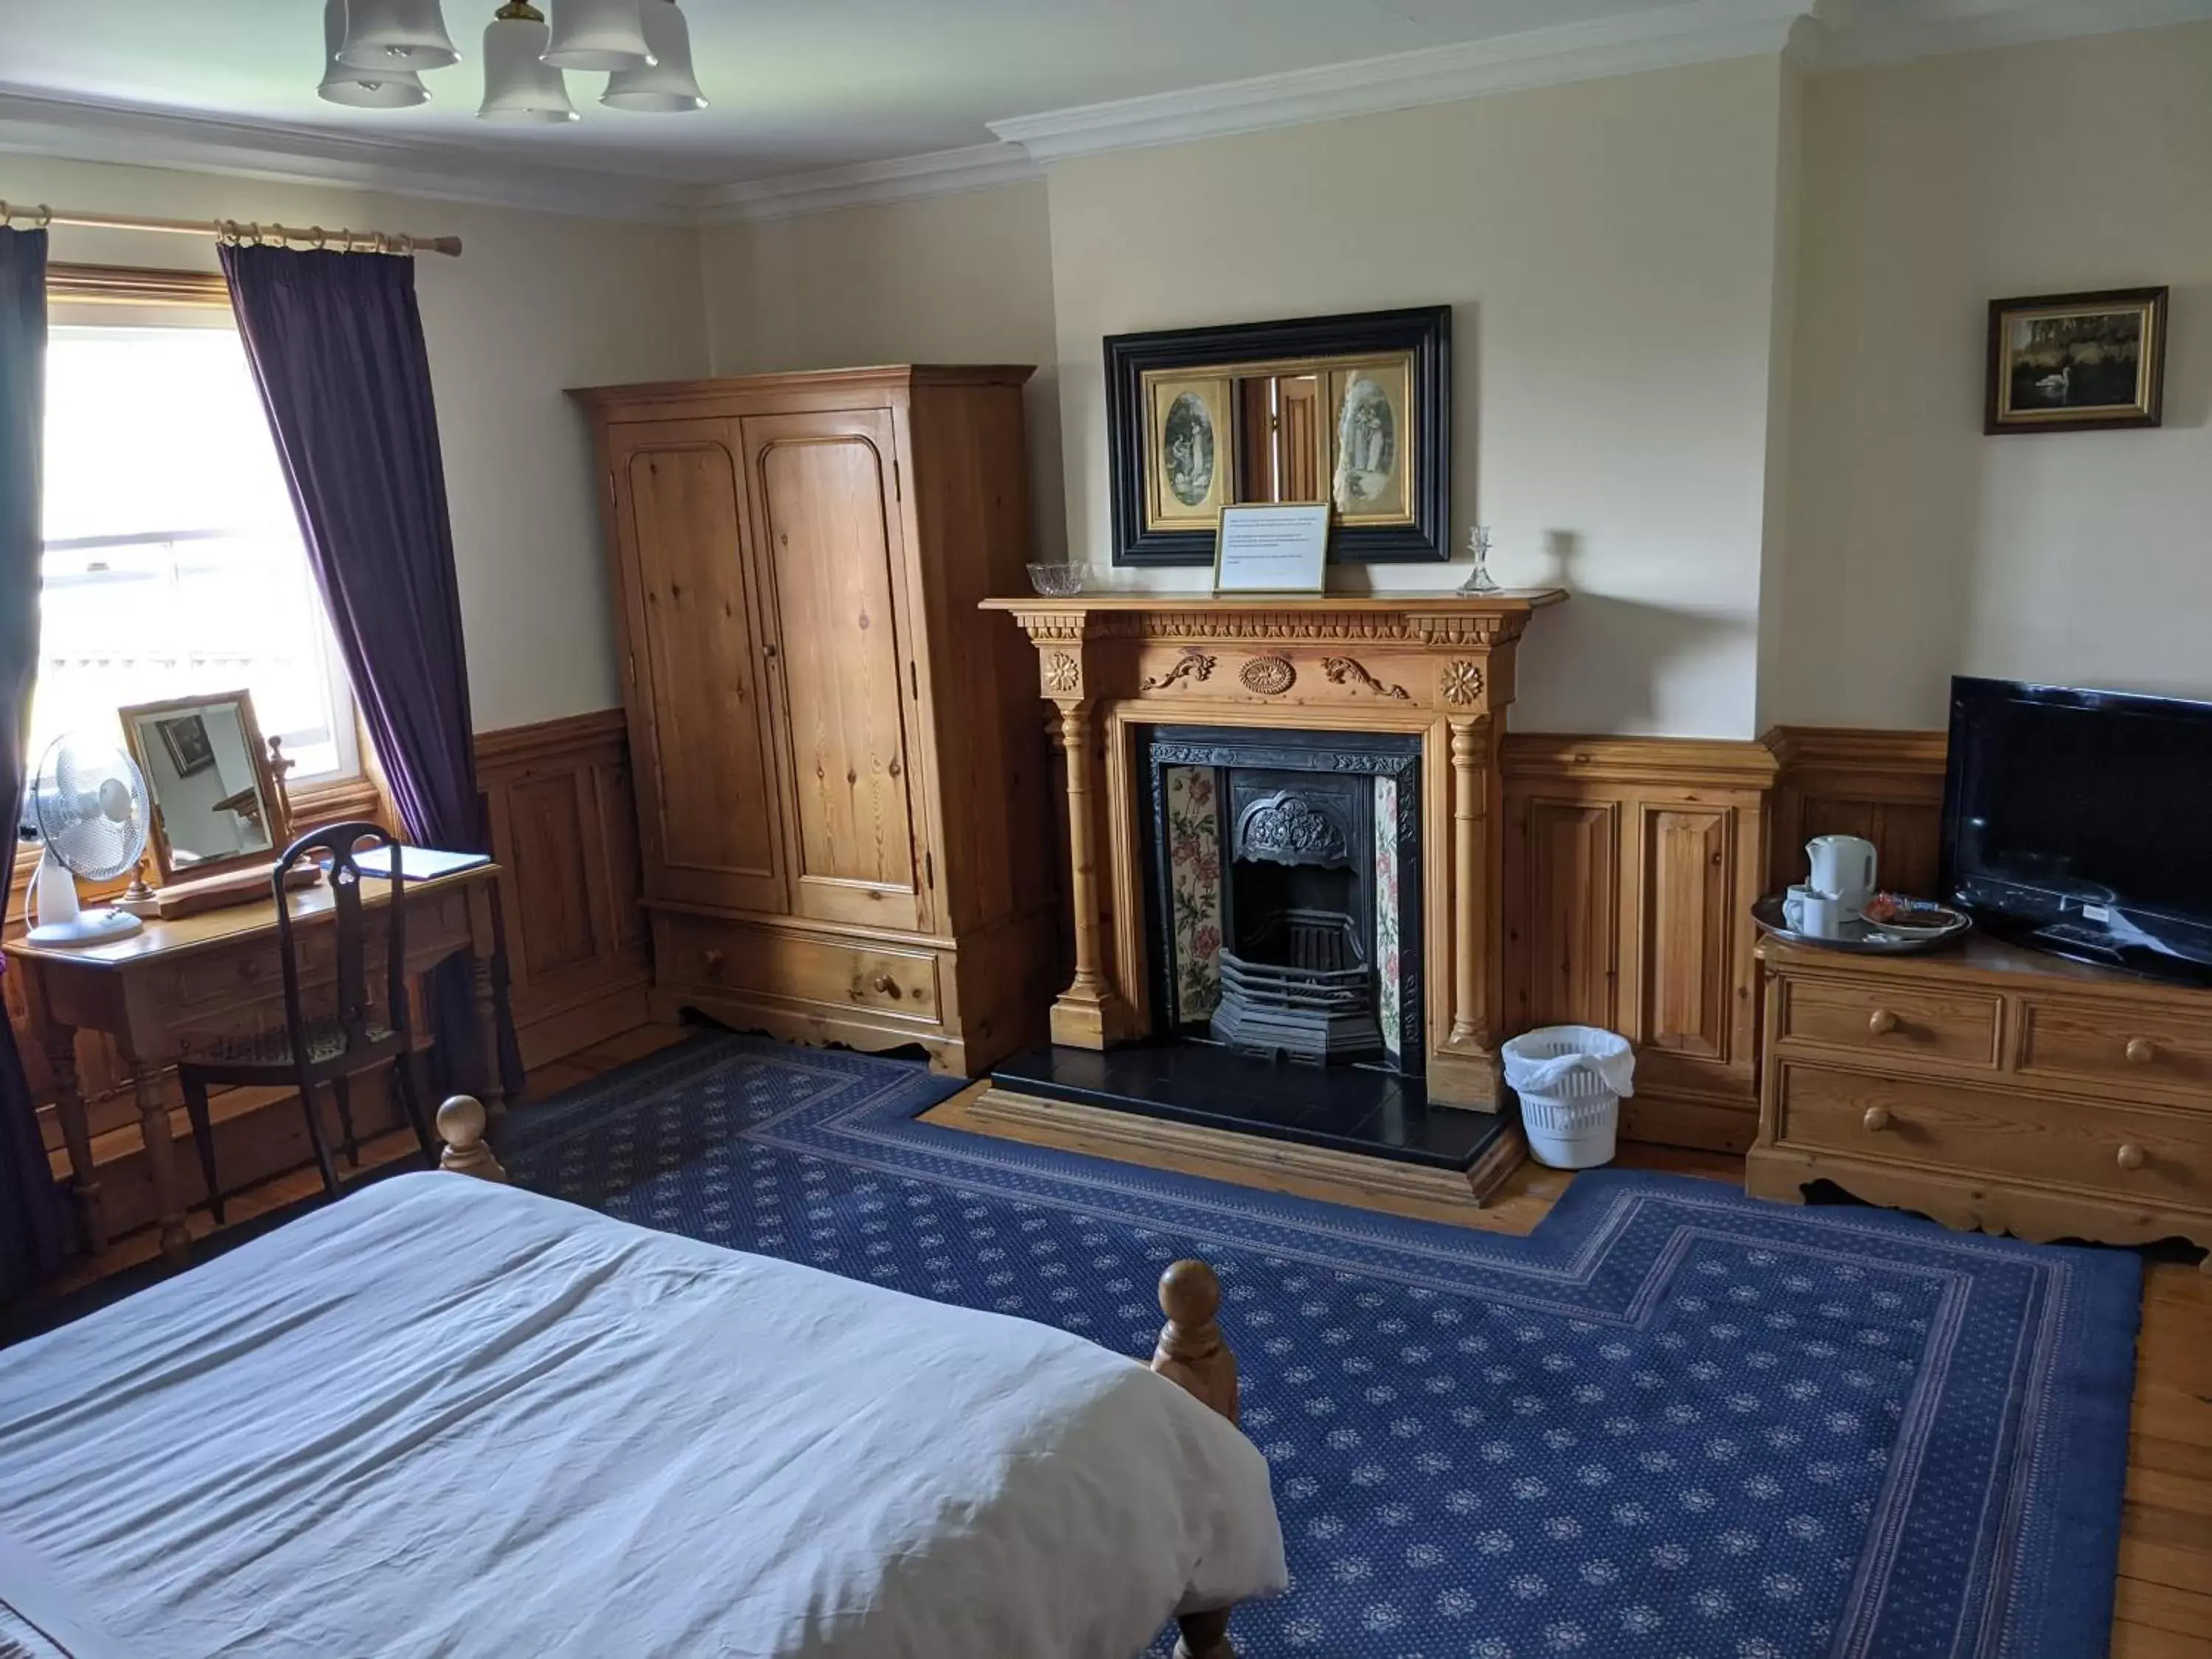 TV/Entertainment Center in The Londesborough Arms bar with en-suite rooms